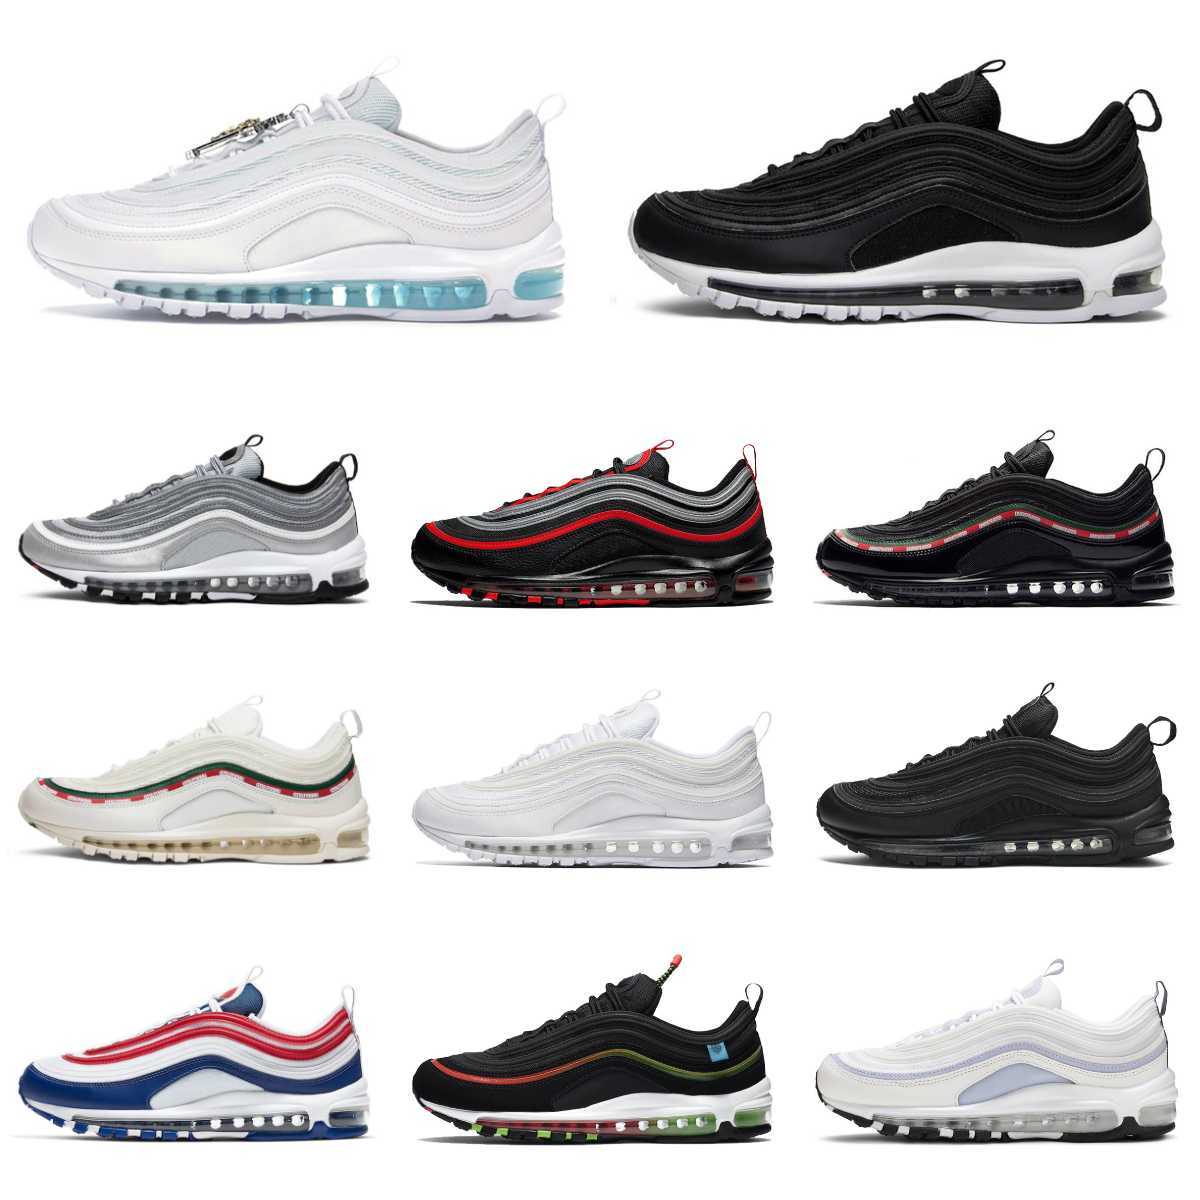 

Trainers Max 97 Casual ShOes Mens Women MSCHF X INRI Jesus Undefeated Black Summit Triple White Metalic Gold Designer Air 97s Sean Wotherspoon Sliver Bullet Sneakers, Please contact us